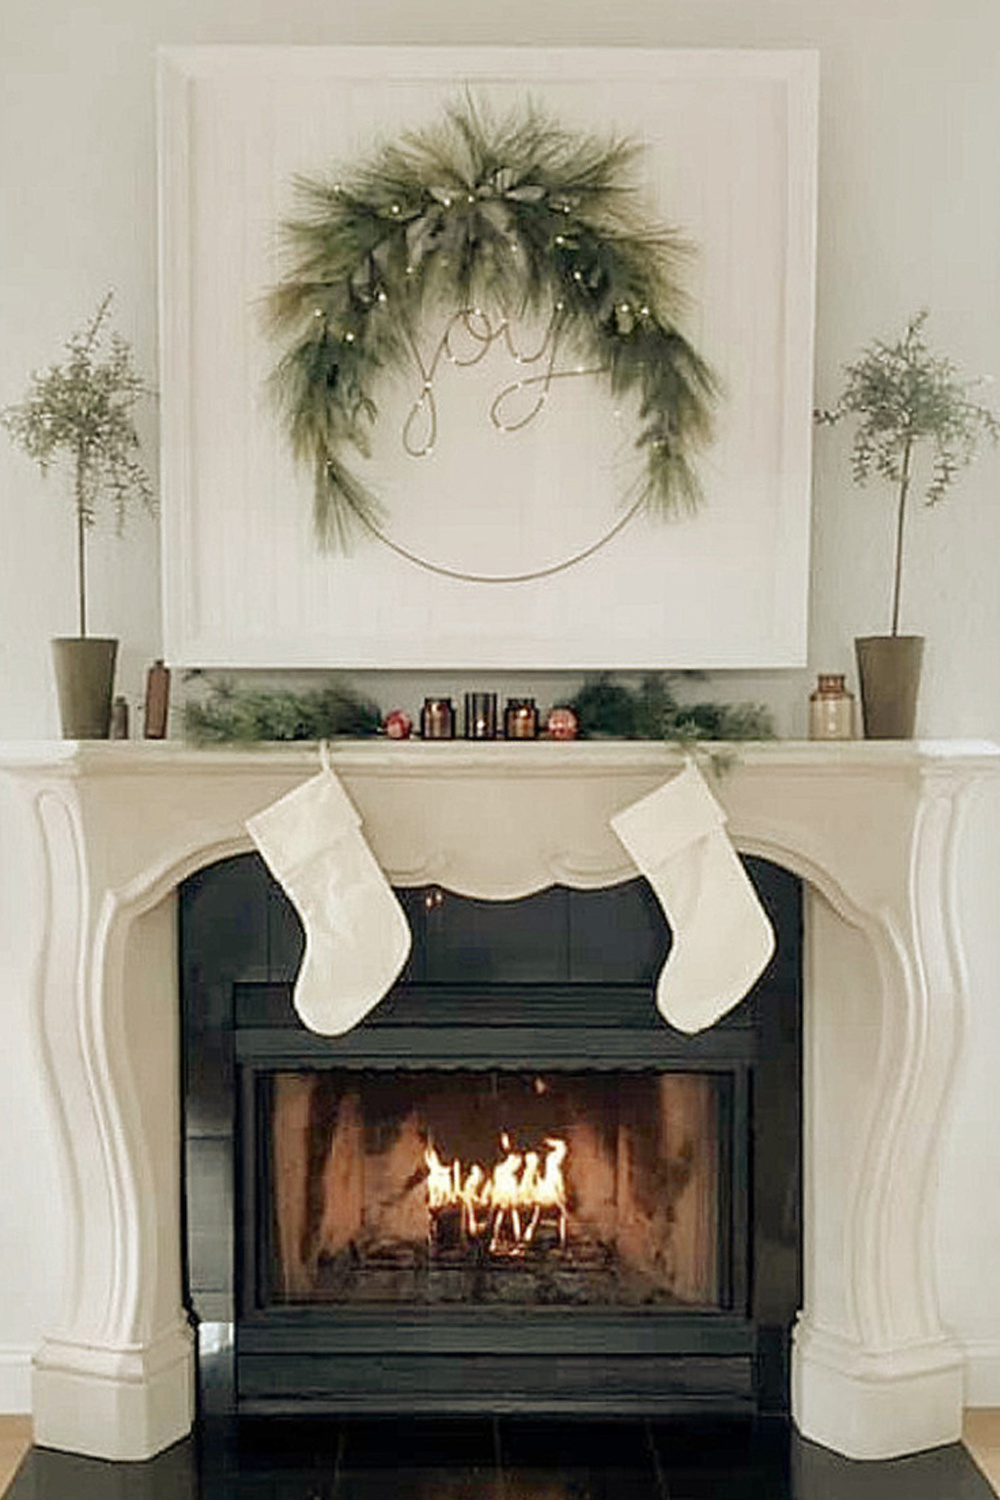 Christmas fireplace with joy wreath, stockings, and a French country surround - Hello Lovely Studio. #hellolovelychristmas #holidayfireplace